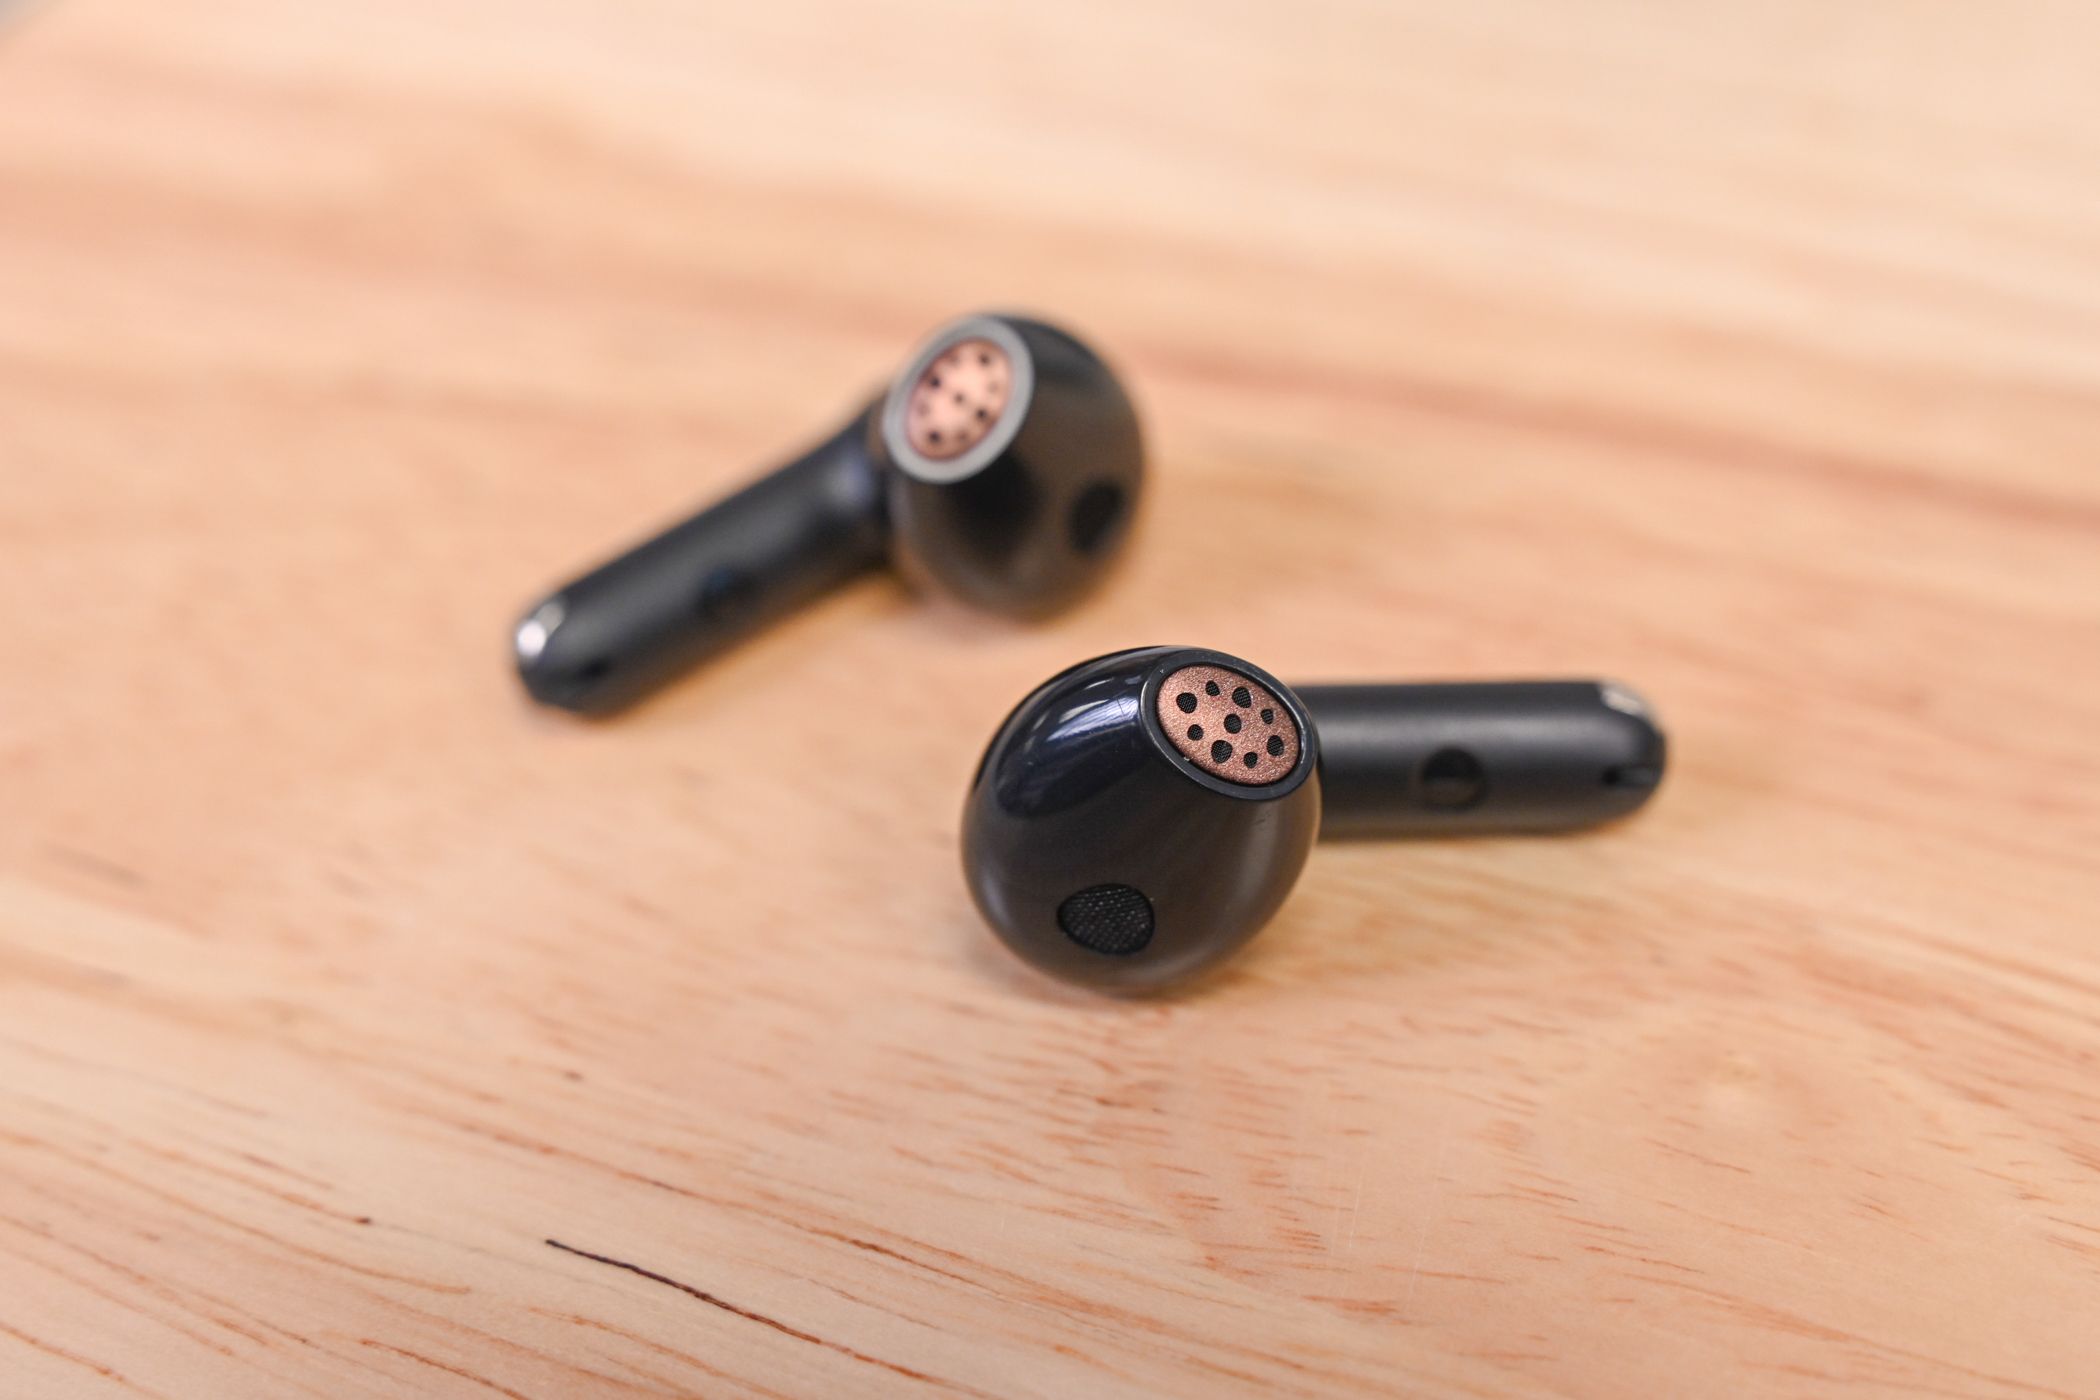 OUNDPEATS Air4 aptX Lossless Wireless Earbuds laid on a wood desk